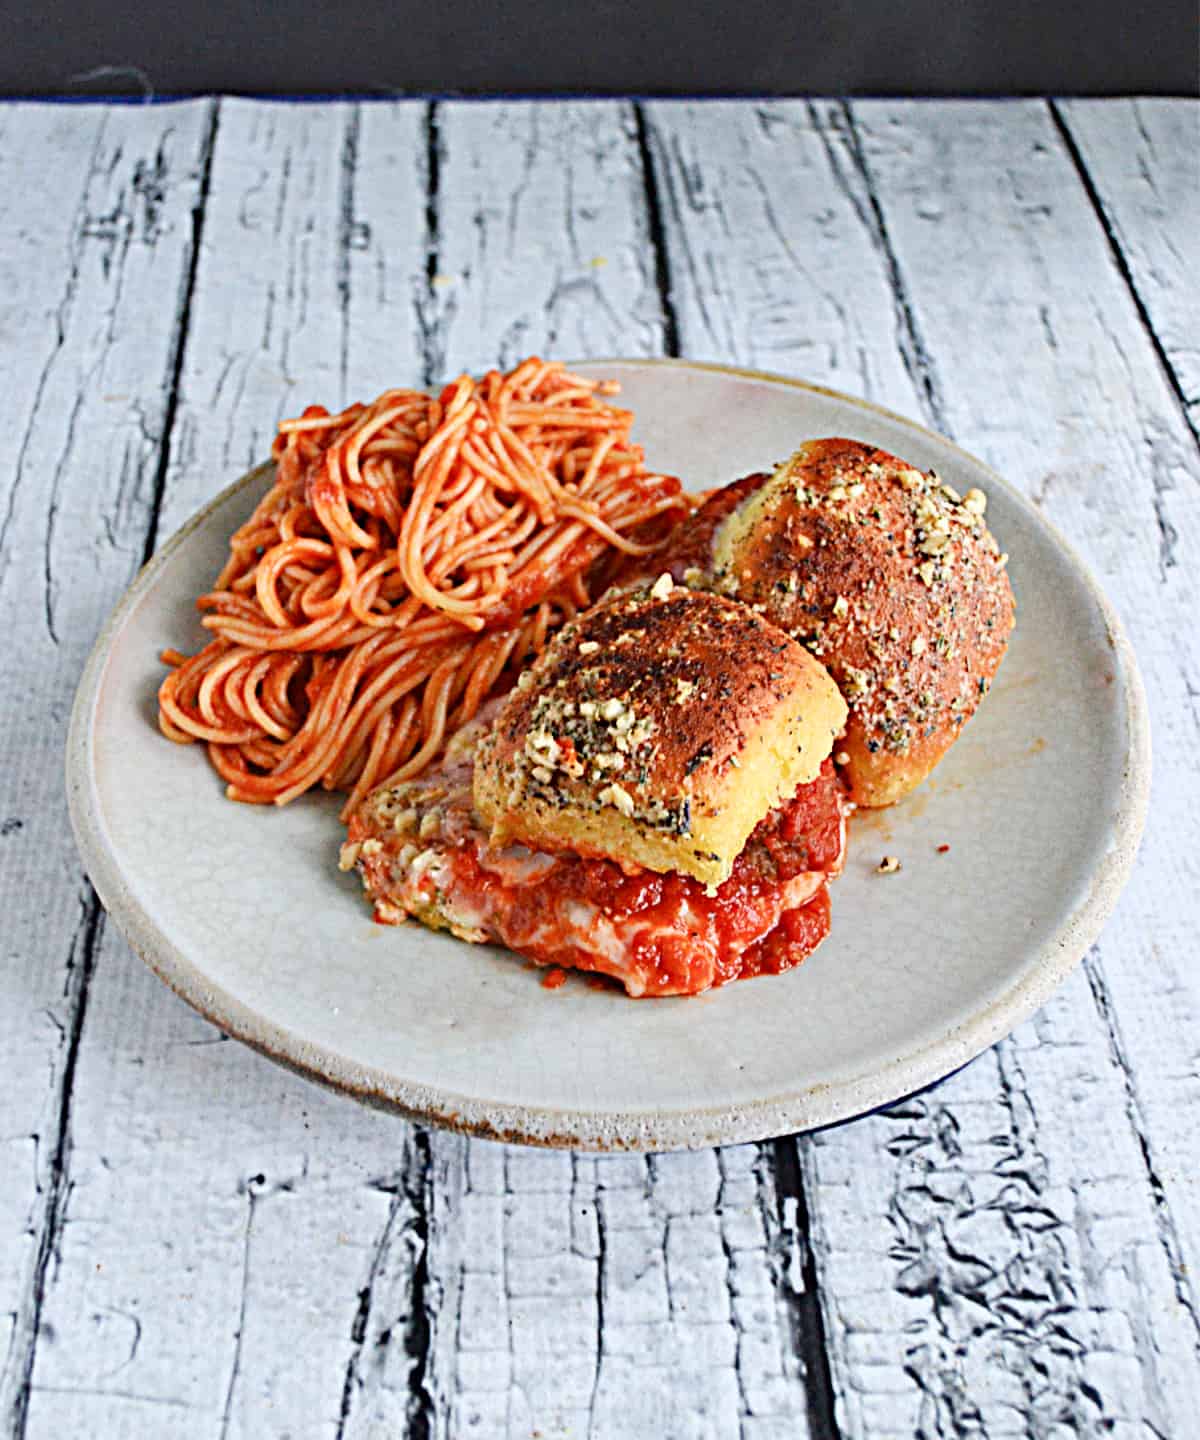 A plate with two meatball sliders and a side dish of spaghetti.